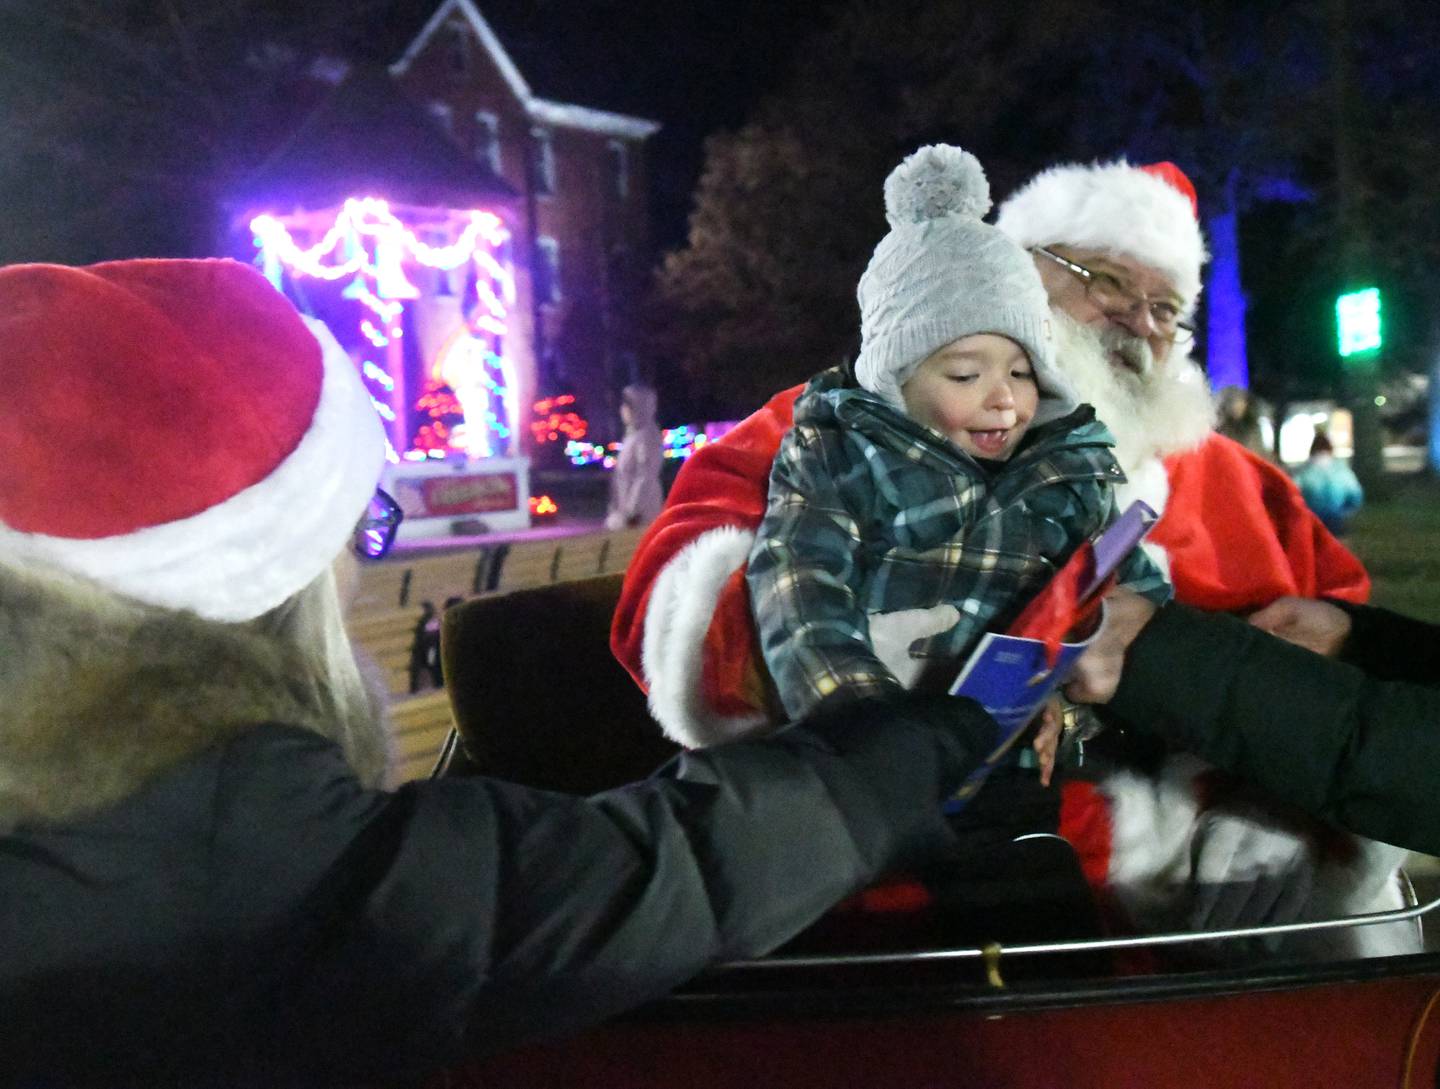 Harrison Taylor, 3, of Mt. Morris visits with Santa Claus at Mt. Morris' Festival of Lights on Dec.3. Harrison also received a free book from the Mt. Morris Library after he spoke with Santa.